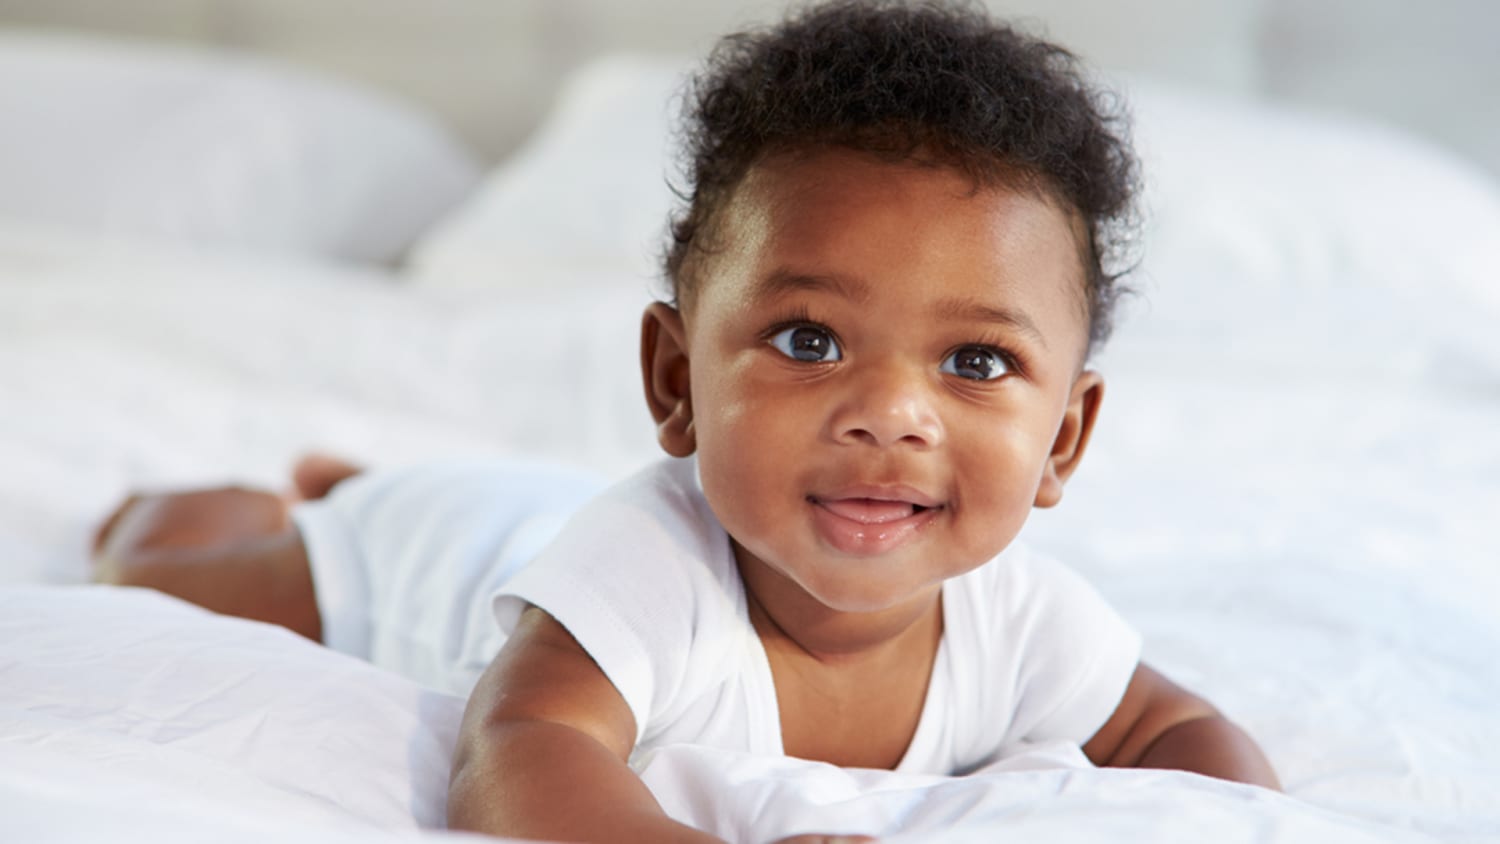 The hottest baby names of summer 2016 according to Nameberry - TODAY.com